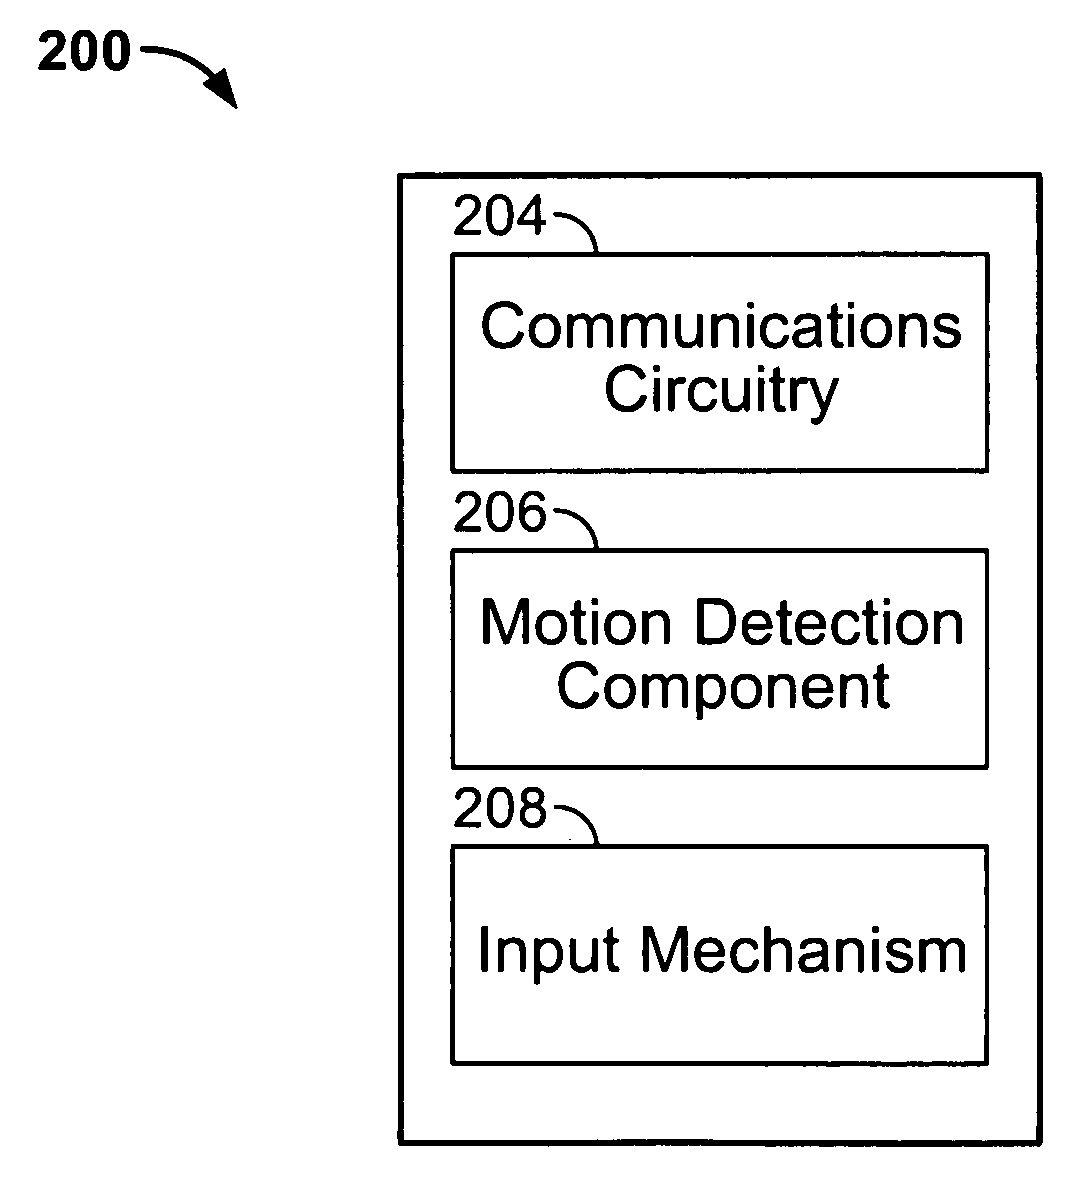 Use of a remote controller Z-direction input mechanism in a media system